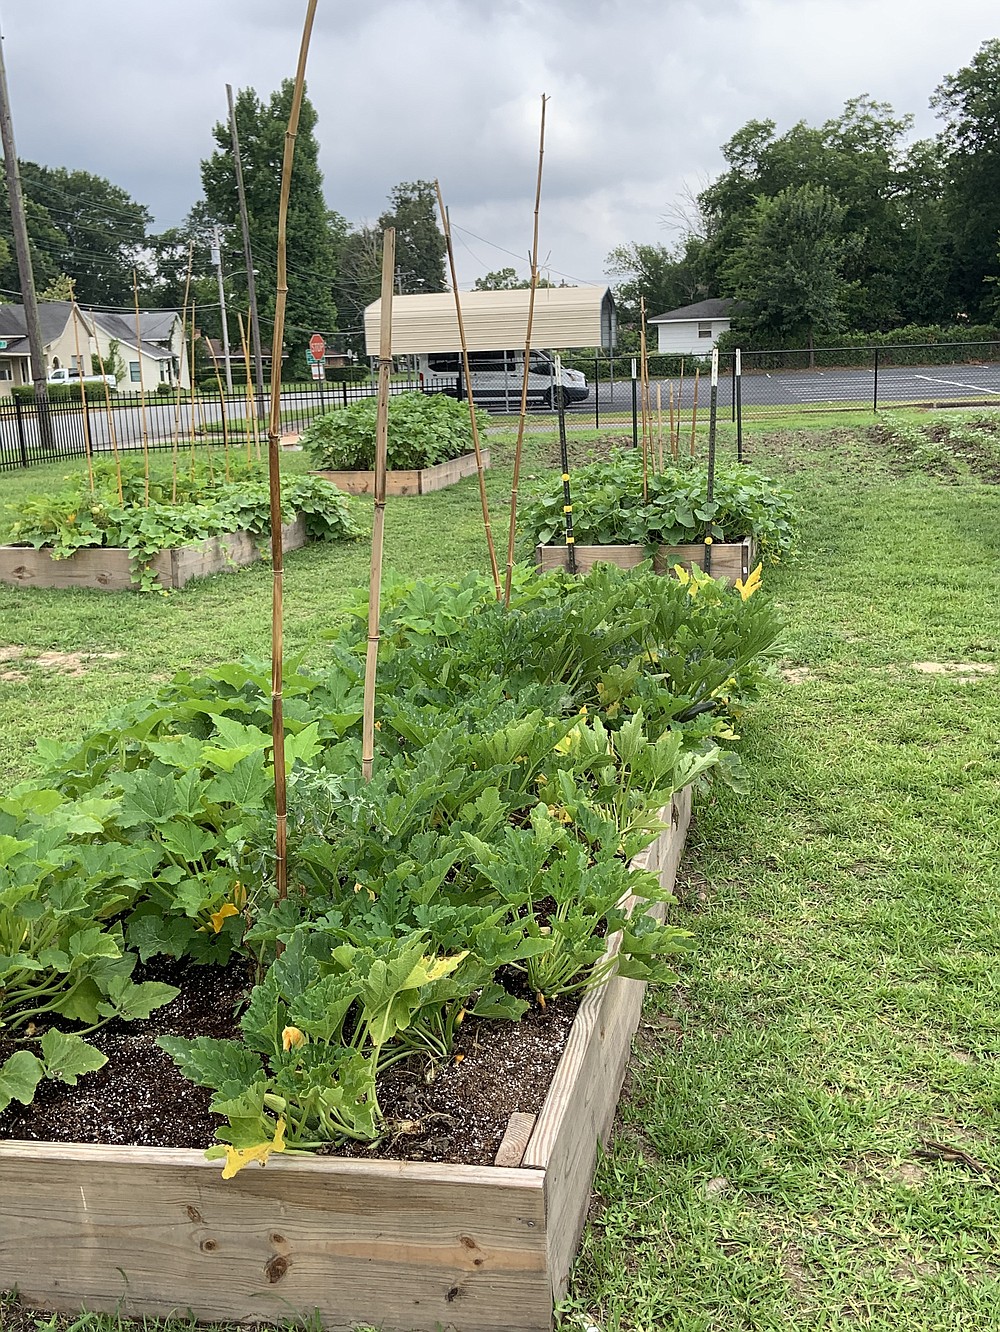 The Barraque Street Missionary Baptist Church at Pine Bluff is an example of an organization that recently sought the assistance of the University of Arkansas at Pine Bluff in setting up a community garden. (Special to The Commercial/University of Arkansas at Pine Bluff)